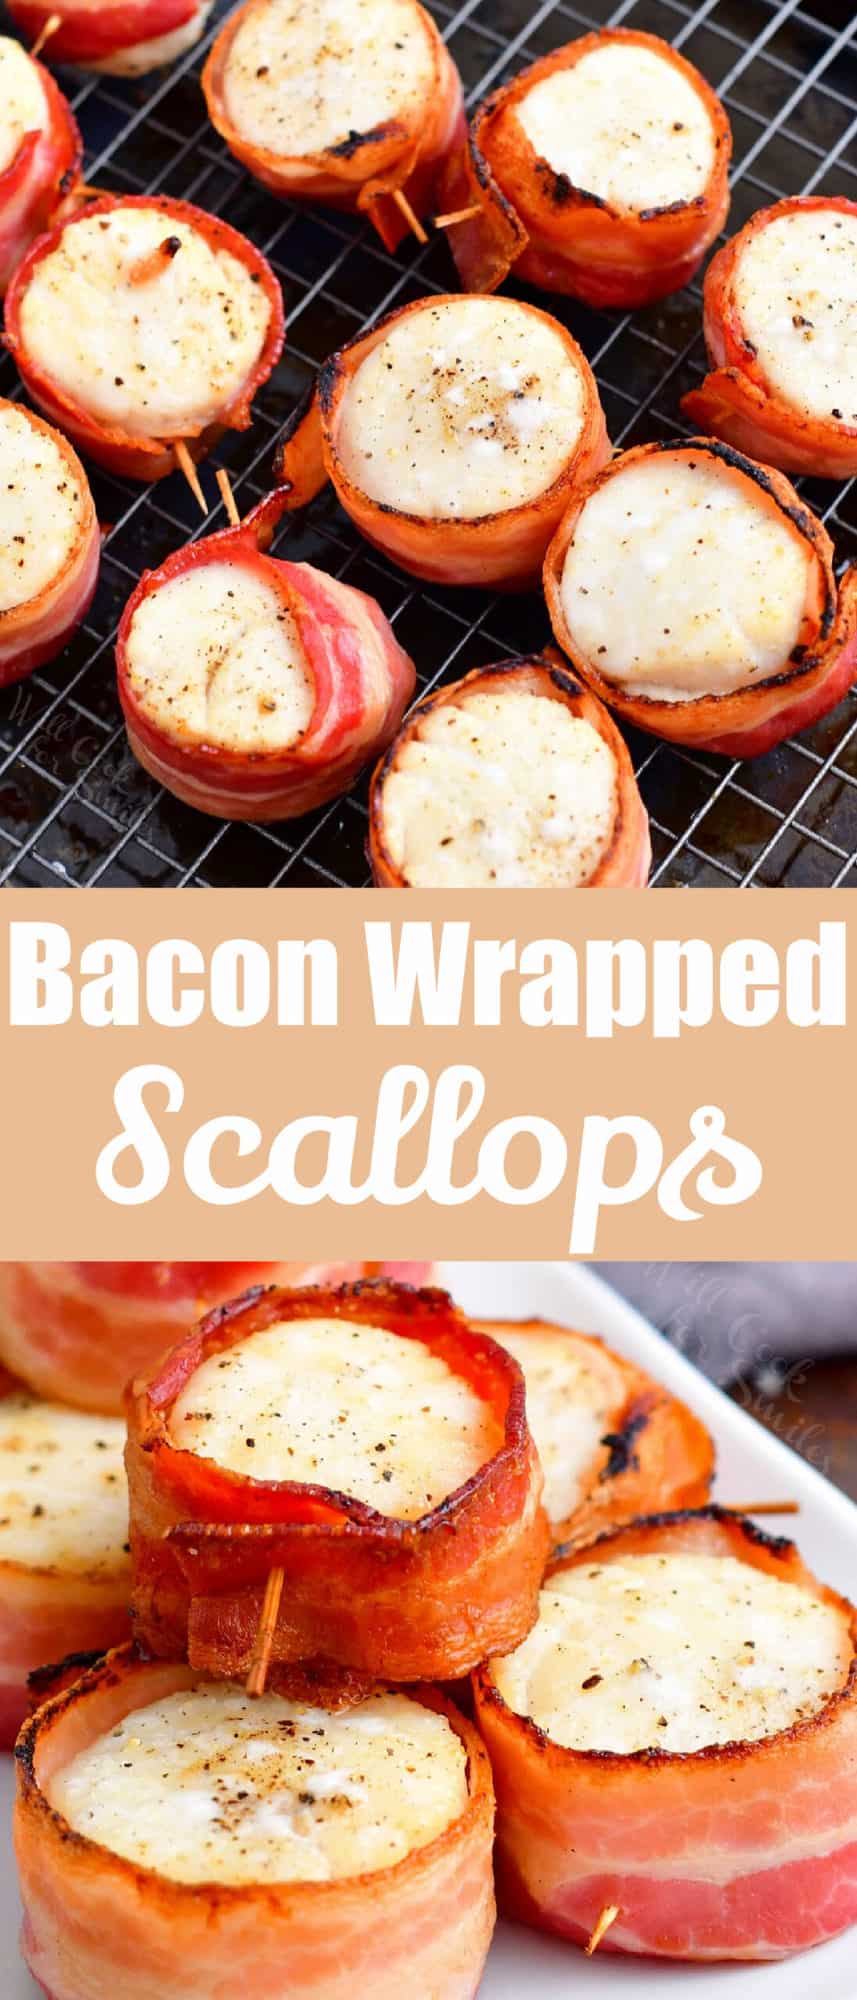 title collage of bacon wrapped scallops on baking sheet and on the serving plate